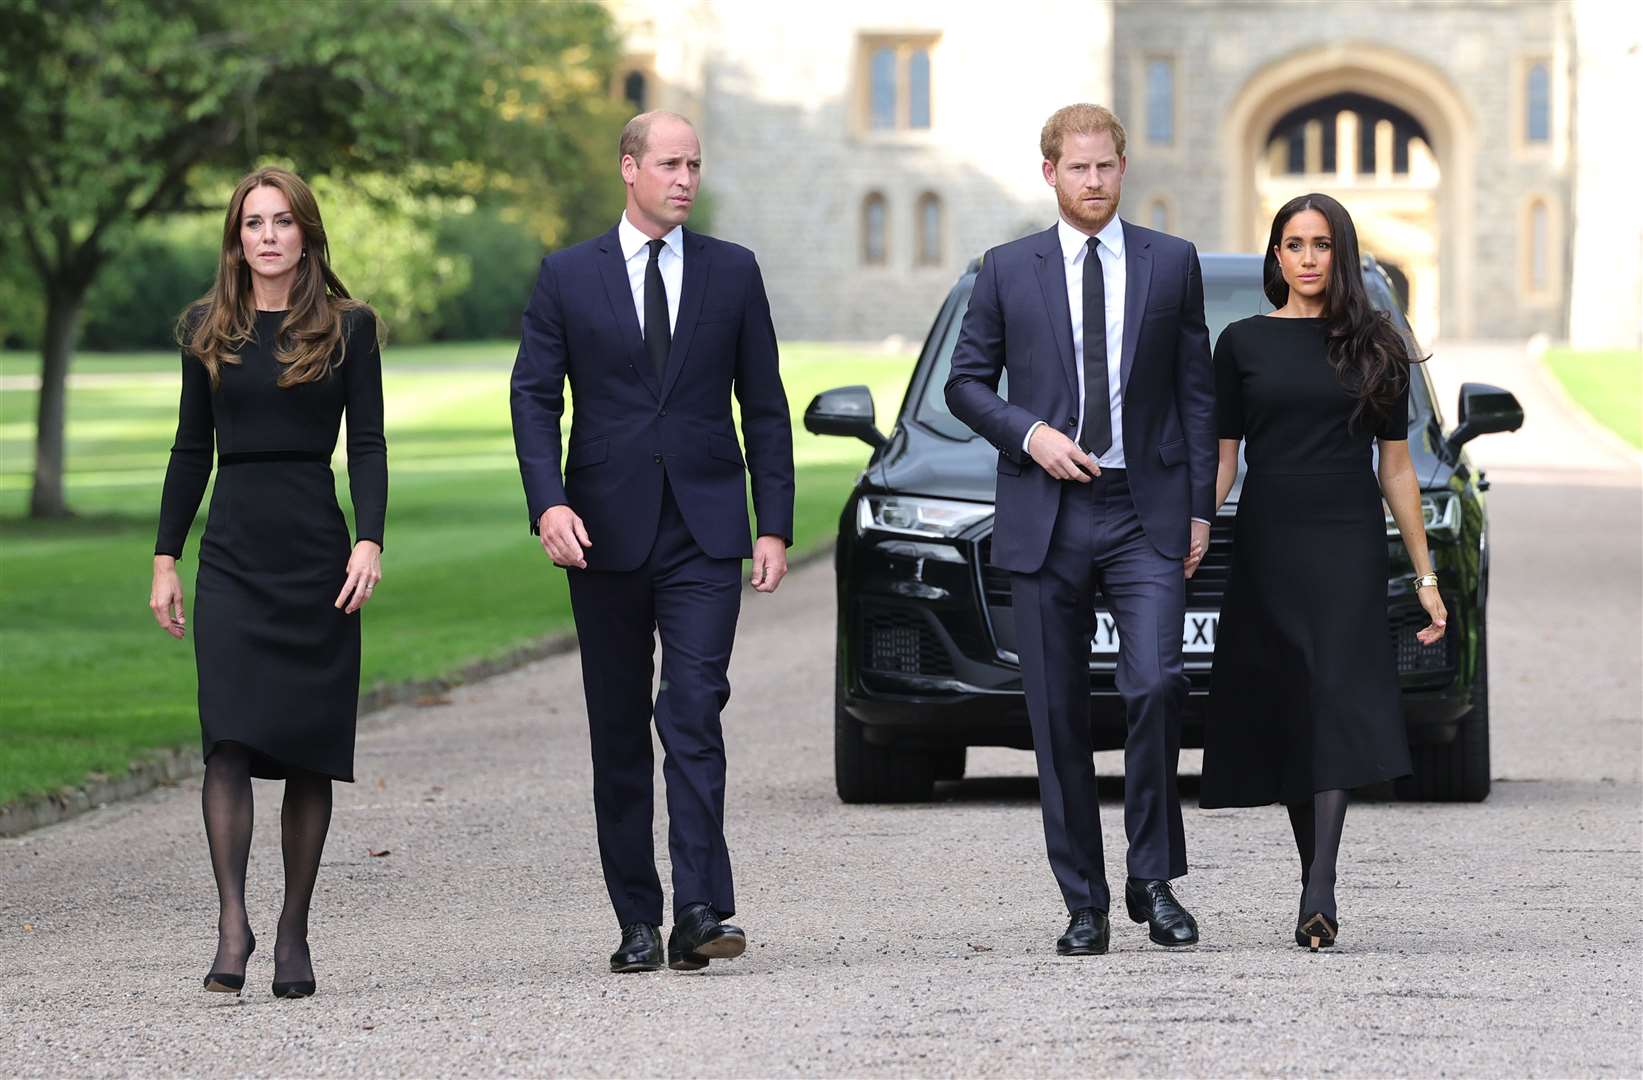 The now Princess of Wales, the Prince of Wales and the Duke and Duchess of Sussex walk to meet members of the public at Windsor Castle in Berkshire following the death of the Queen (Chris Jackson/PA)